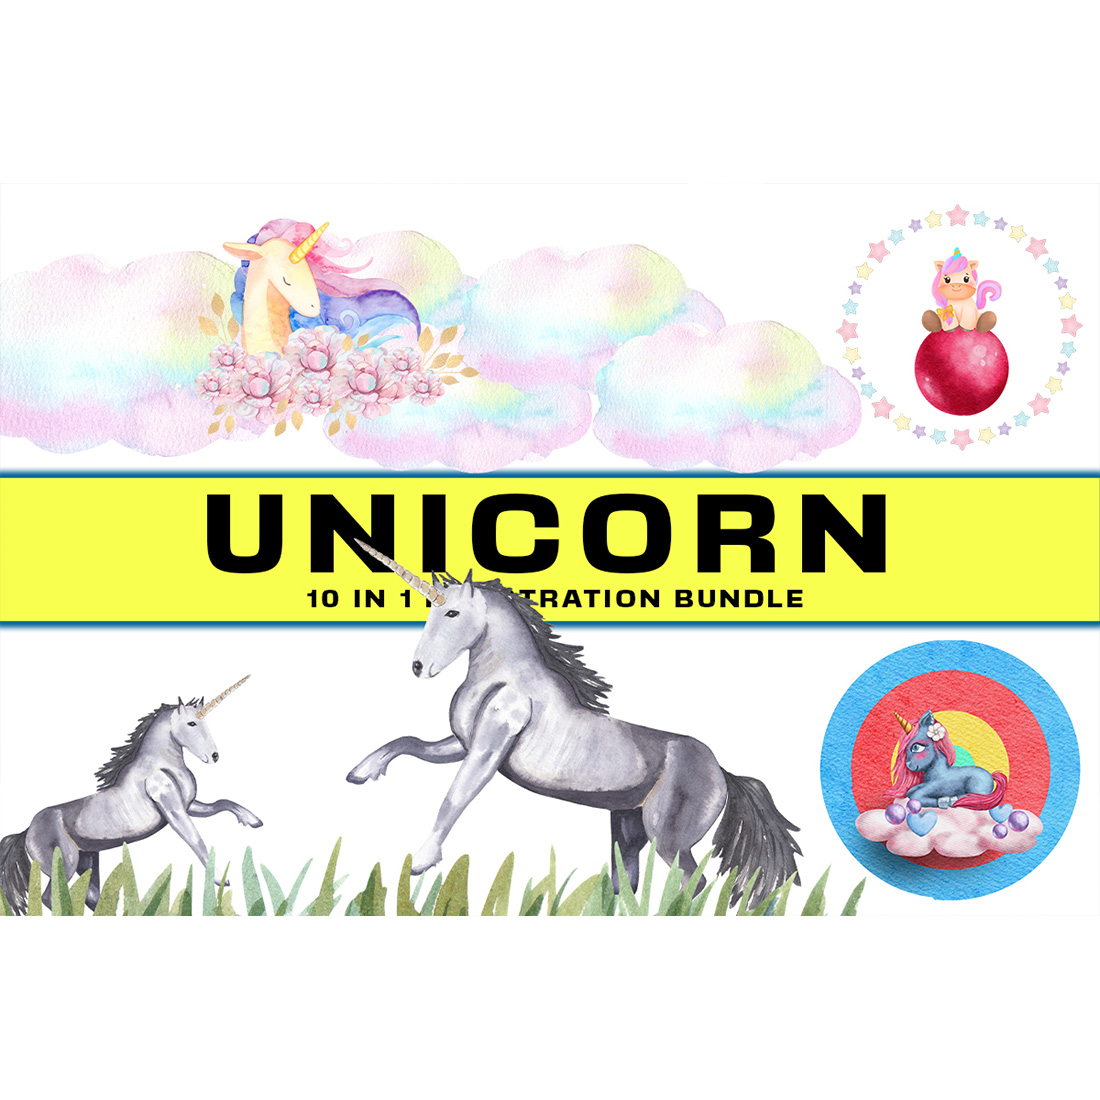 Set of colorful images with unicorns